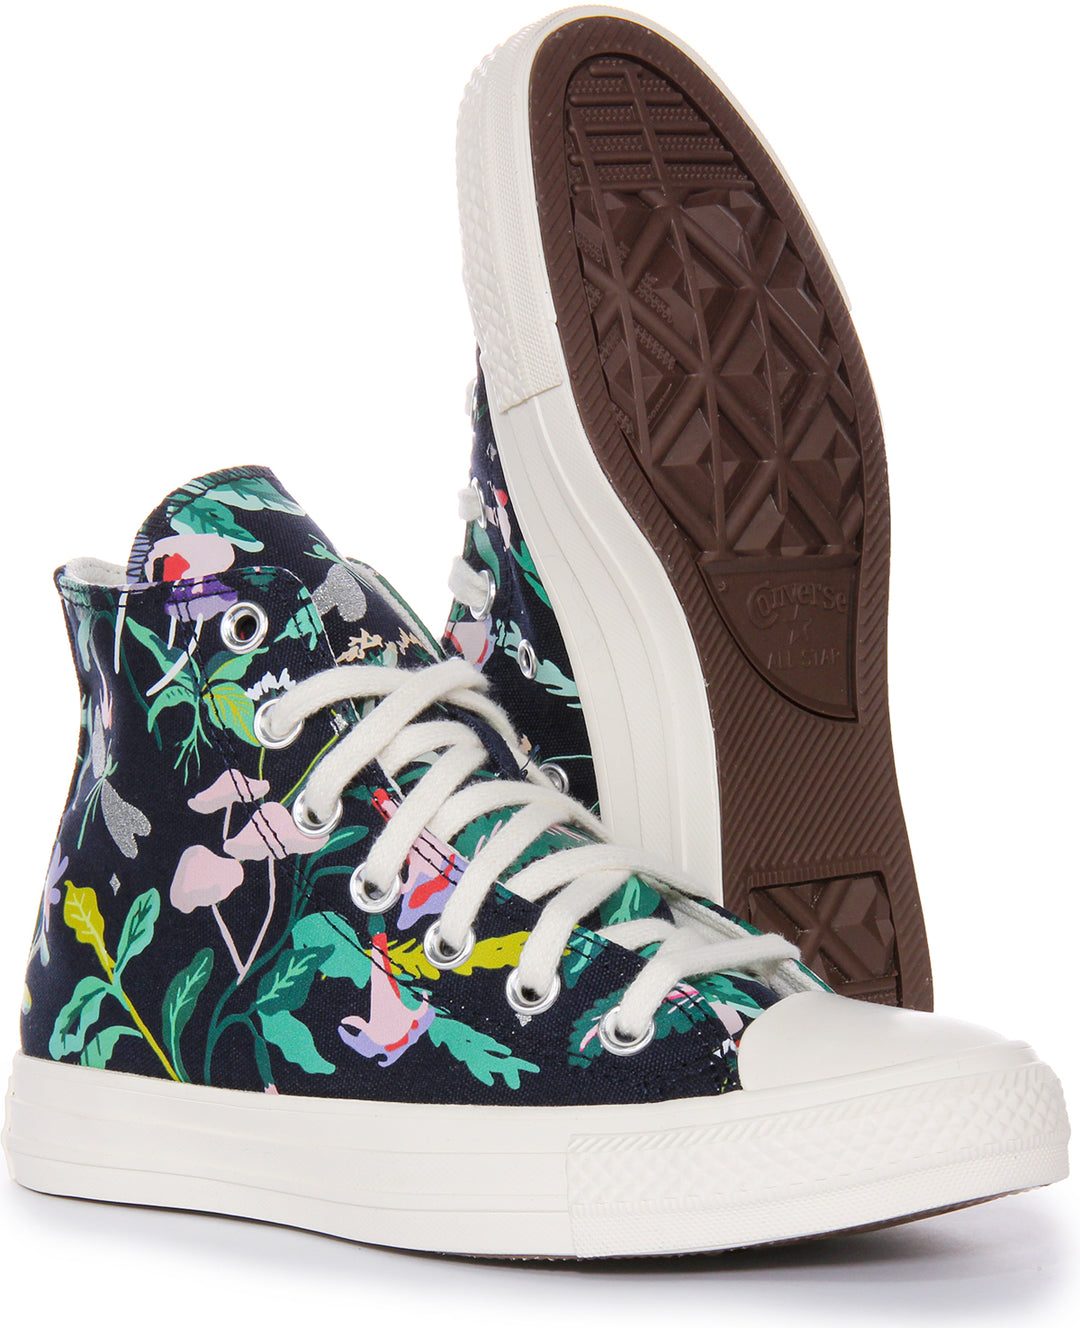 Converse All Star Hi A07109C In Navy Floral